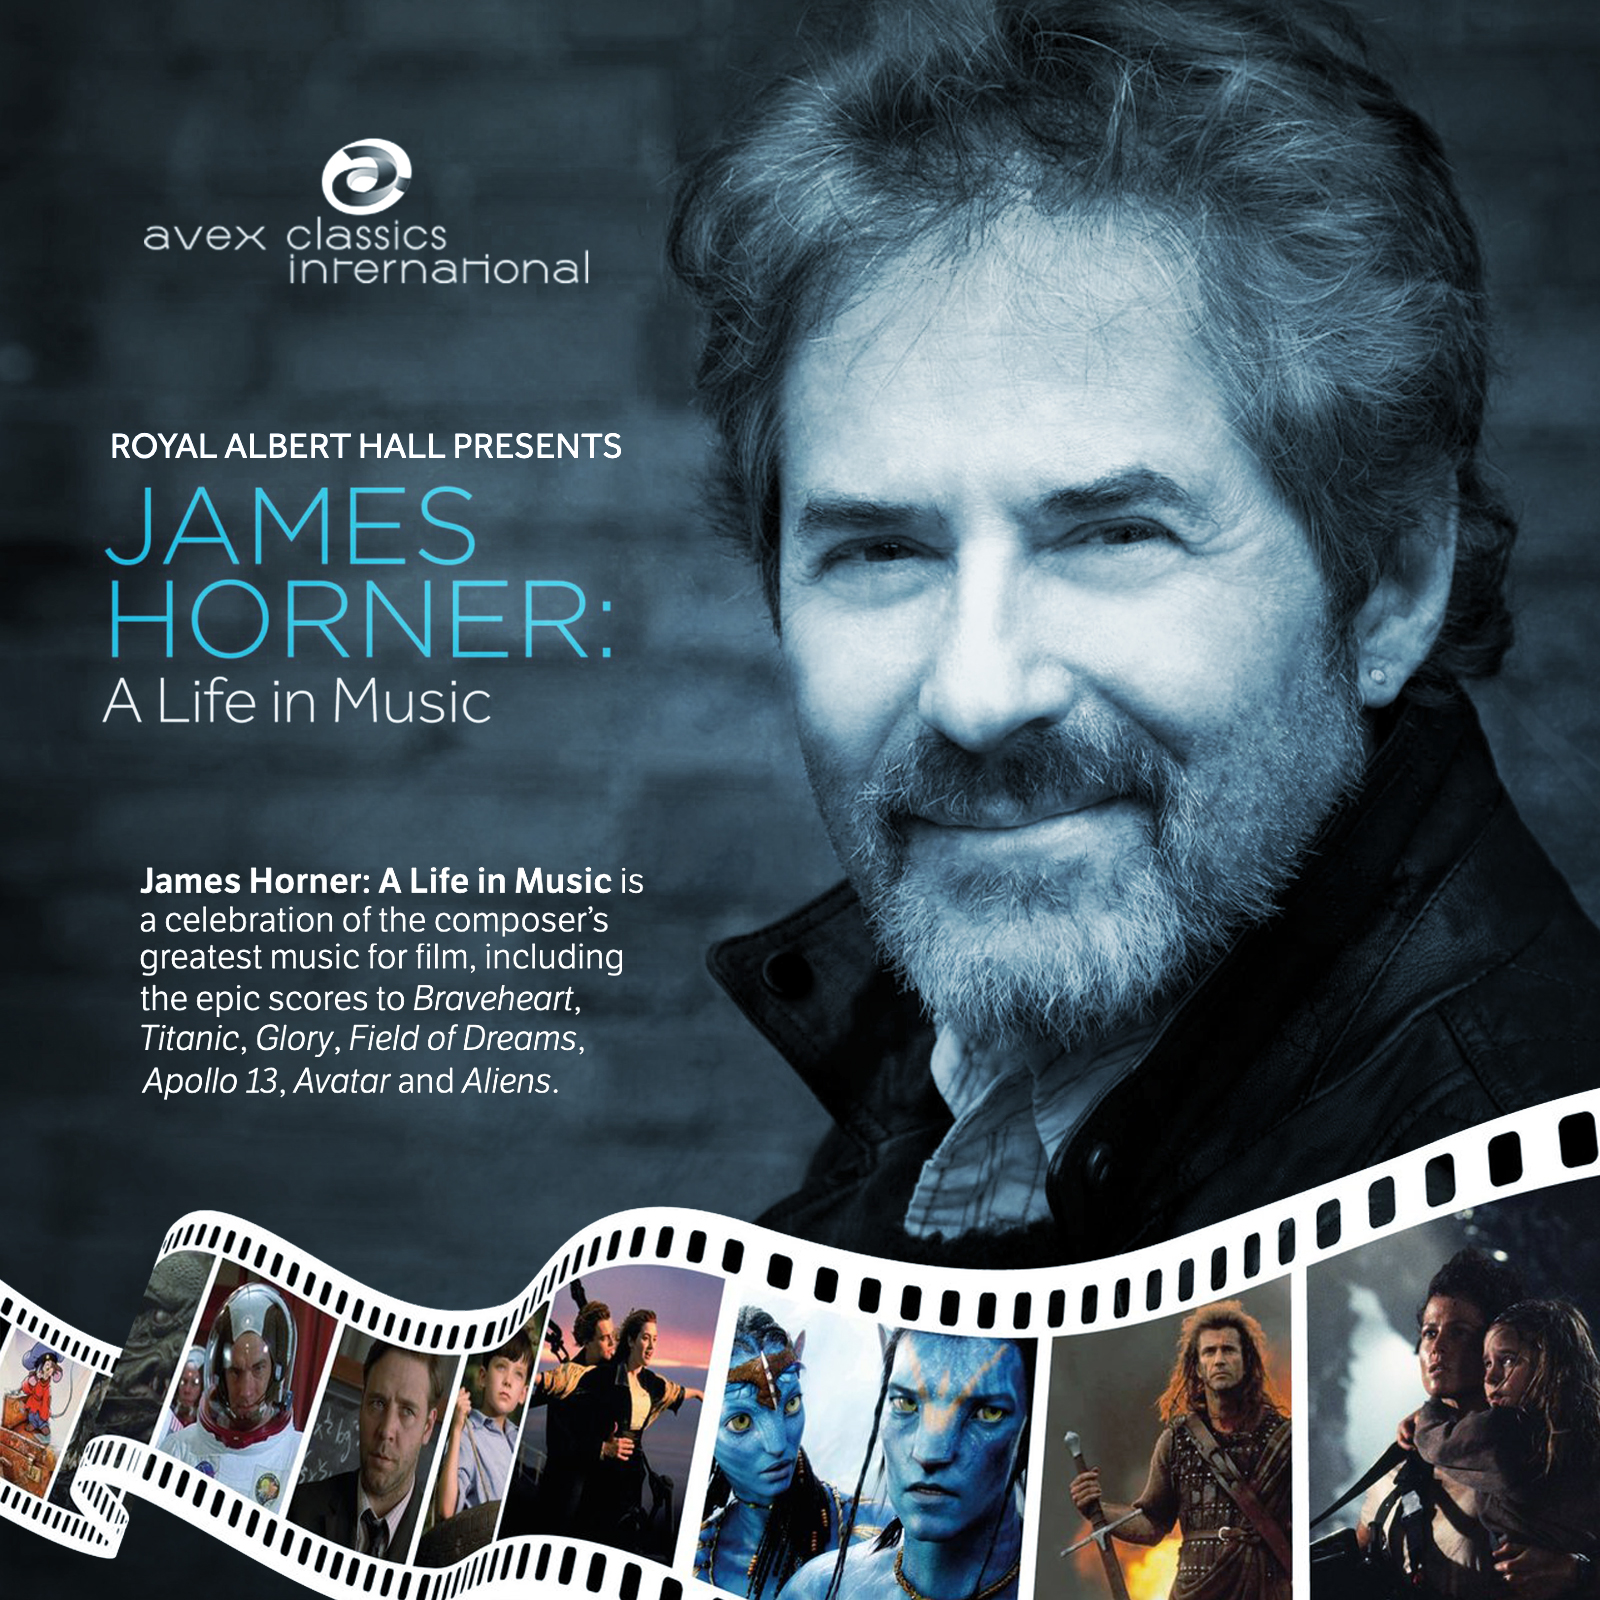 Royal Albert Hall presents James Horner A Life in Music